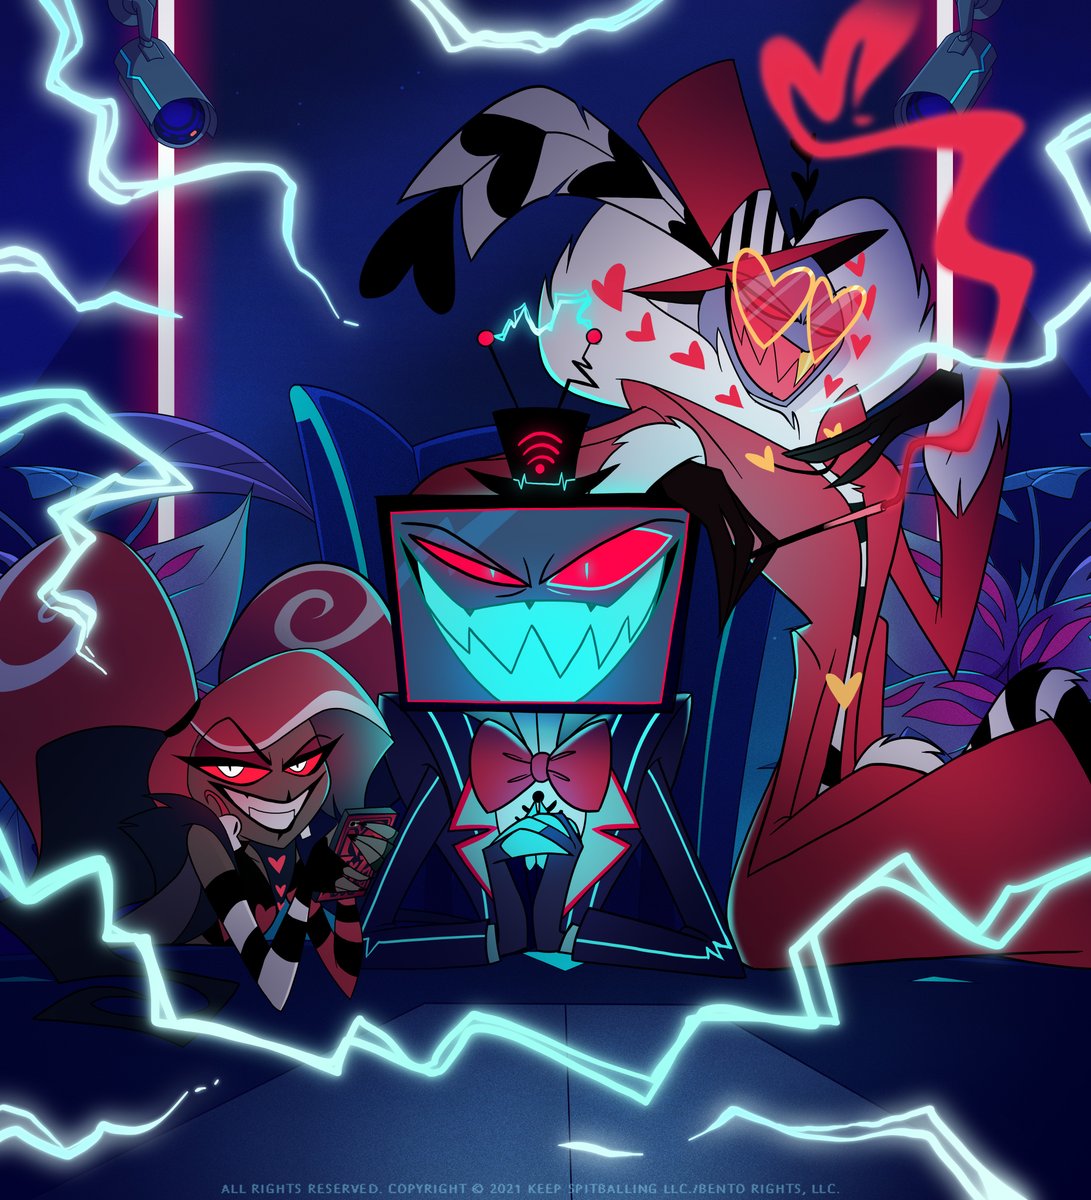 Happy Halloween from hell's most sinister overlords; Vox, Velvette, Valentino - the VEES. #hazbinhotel